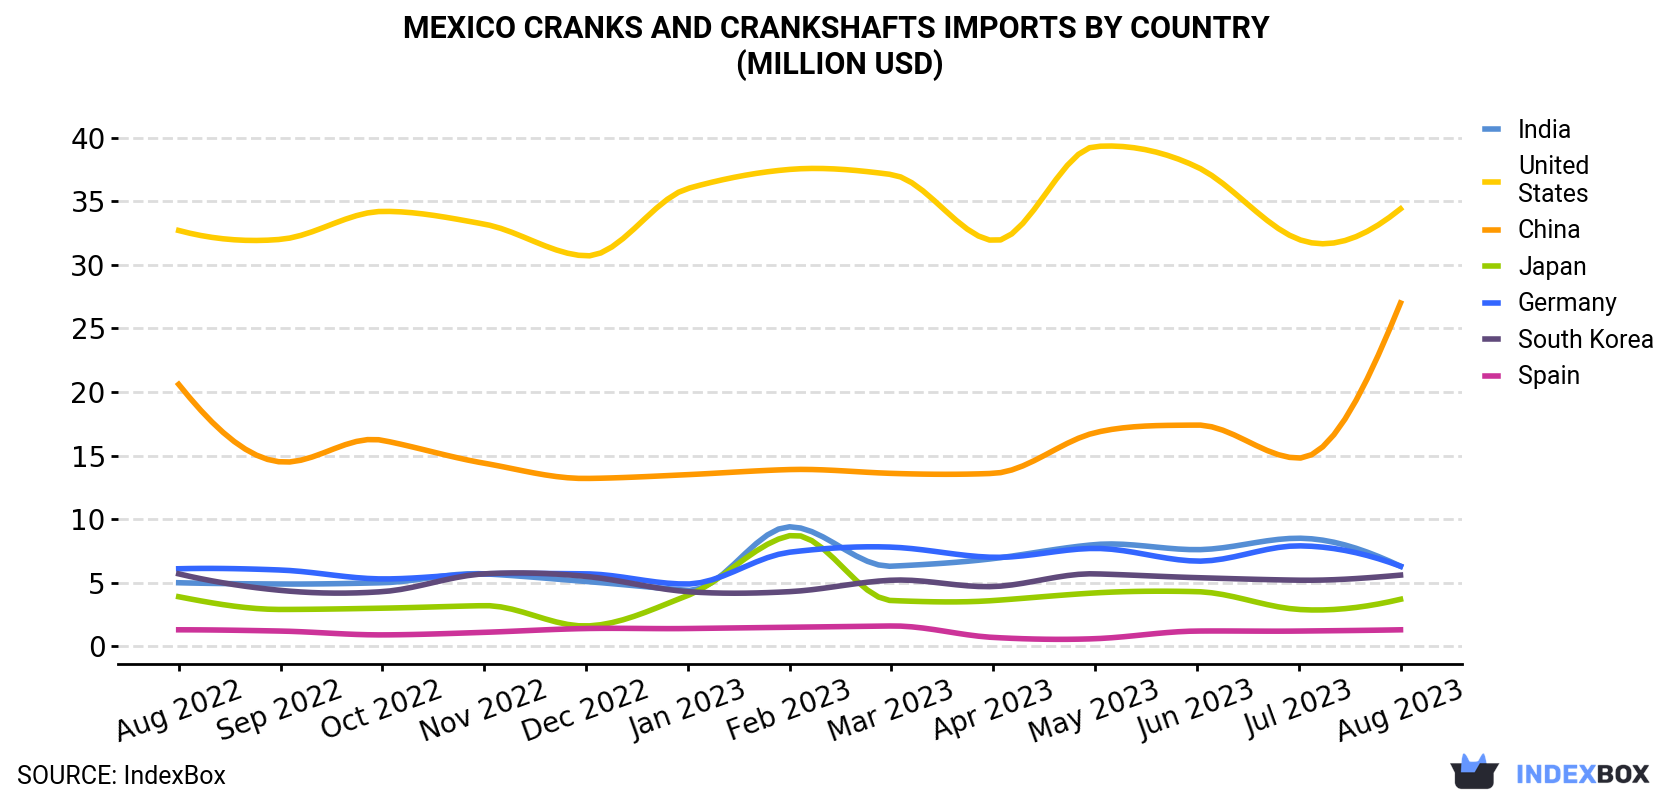 Mexico Cranks And Crankshafts Imports By Country (Million USD)